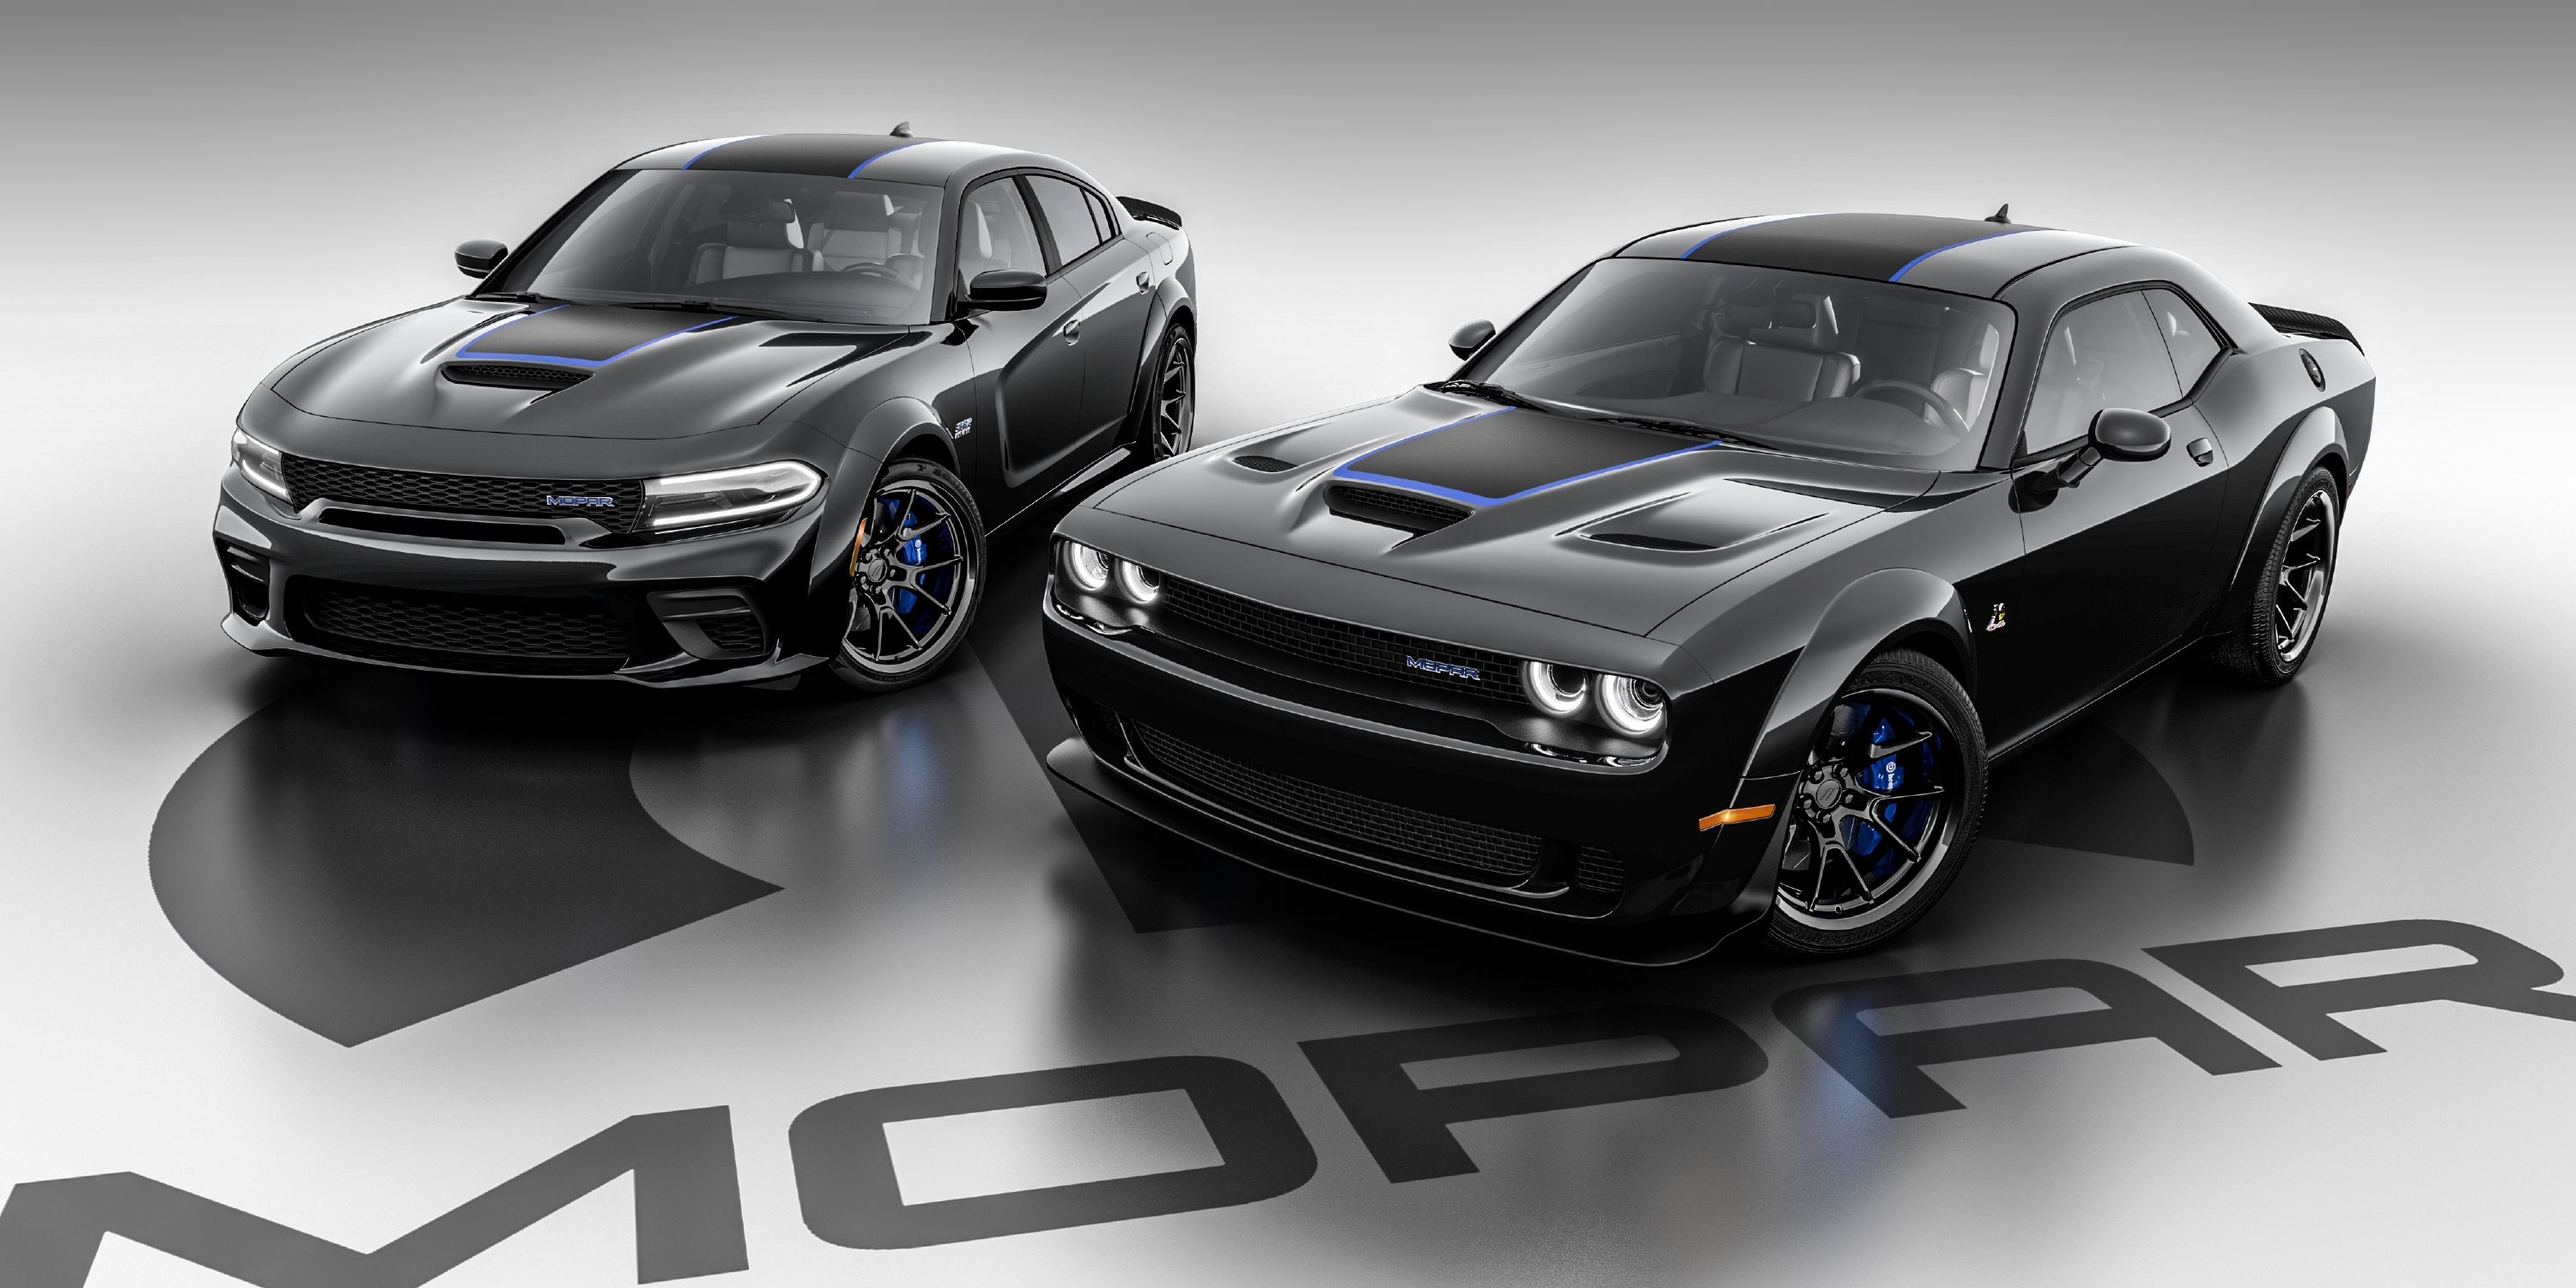 Mopar Rolls Out Two Special Edition Muscle Cars as a Send-Off